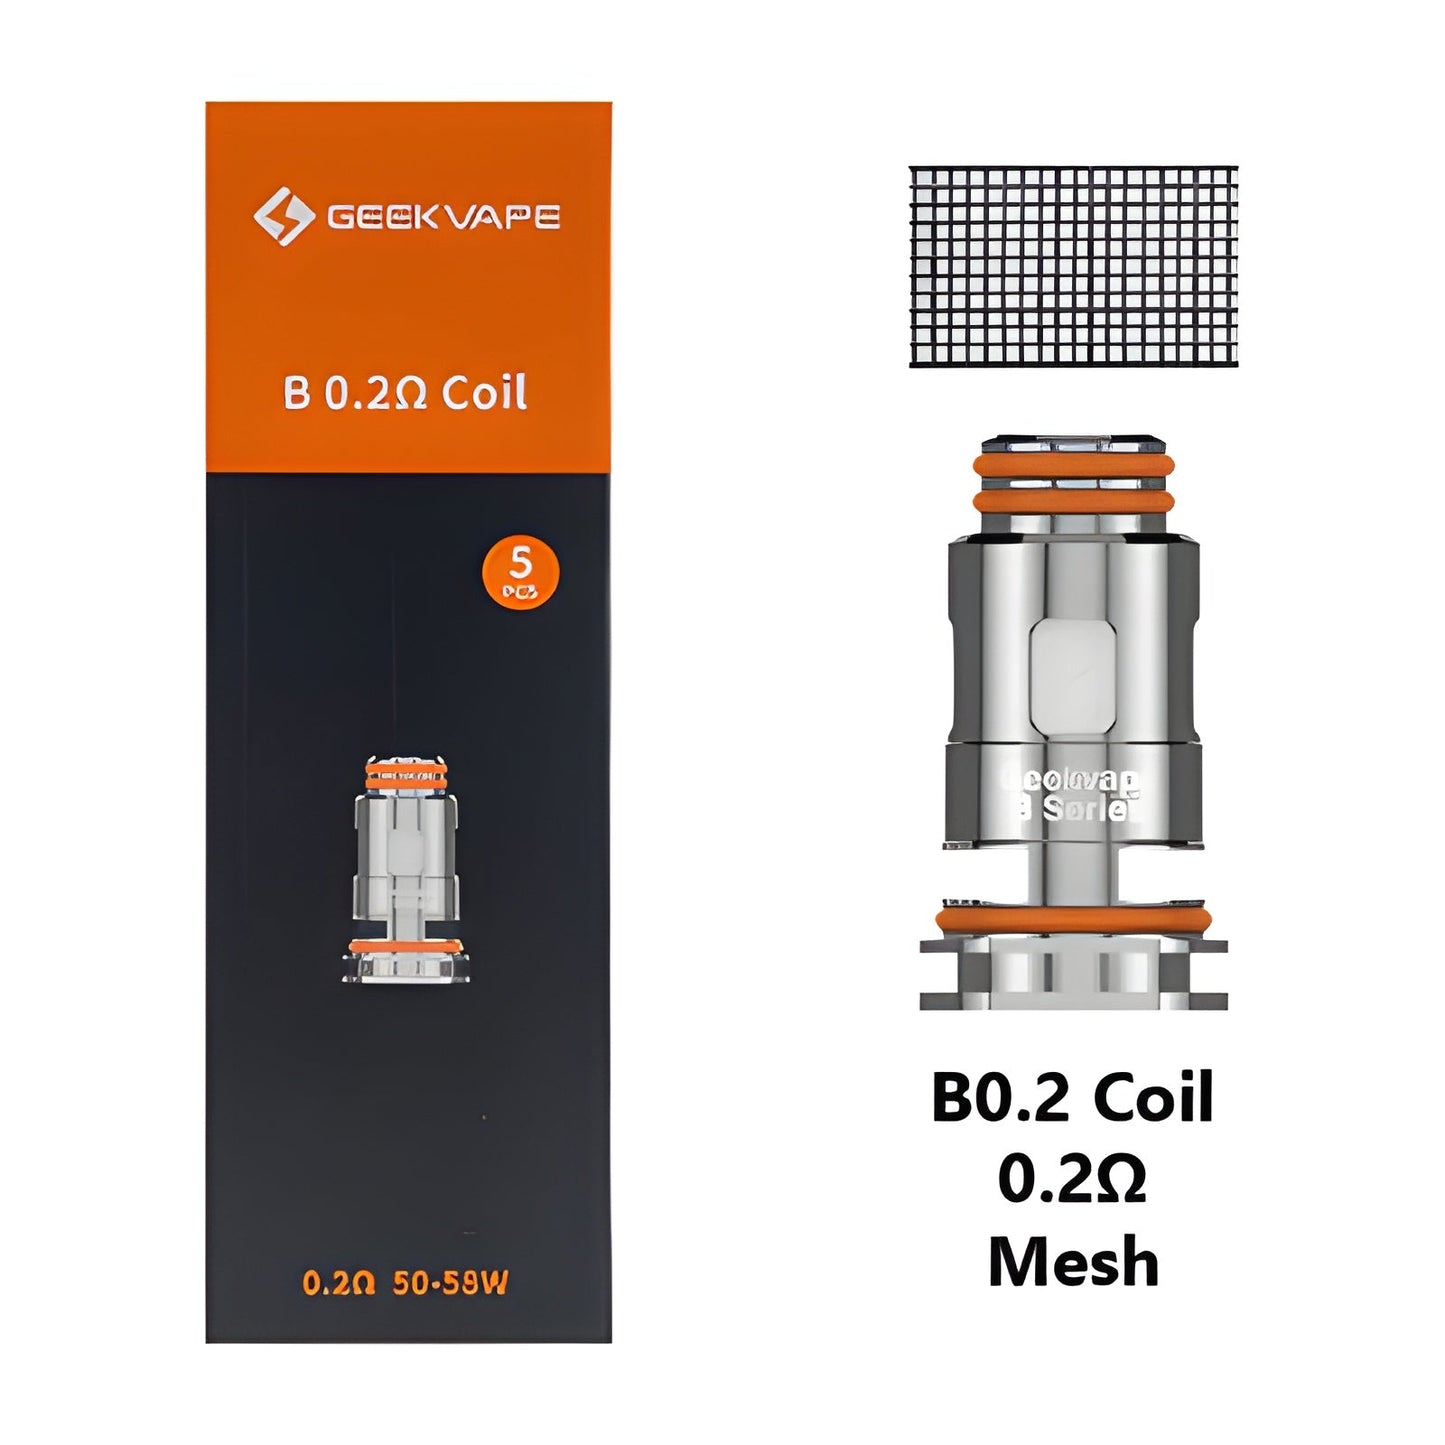 GeekVape Aegis Boost Coils (5-Pack) 0.2 with packaging